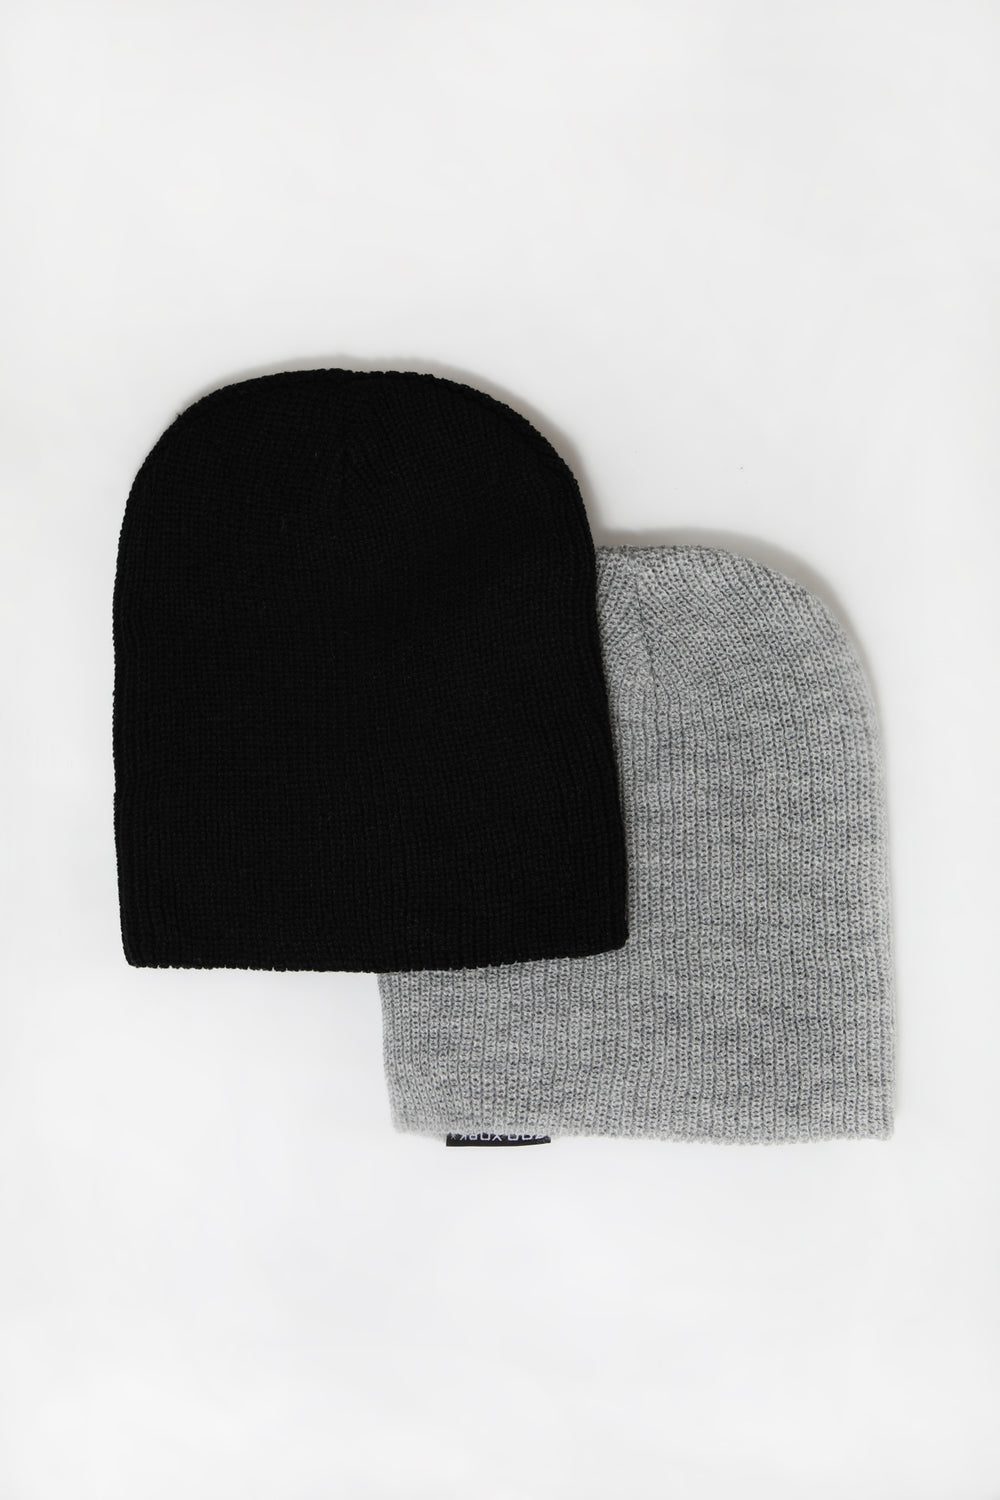 2 Tuques Style Slouchy Zoo York Homme Gris